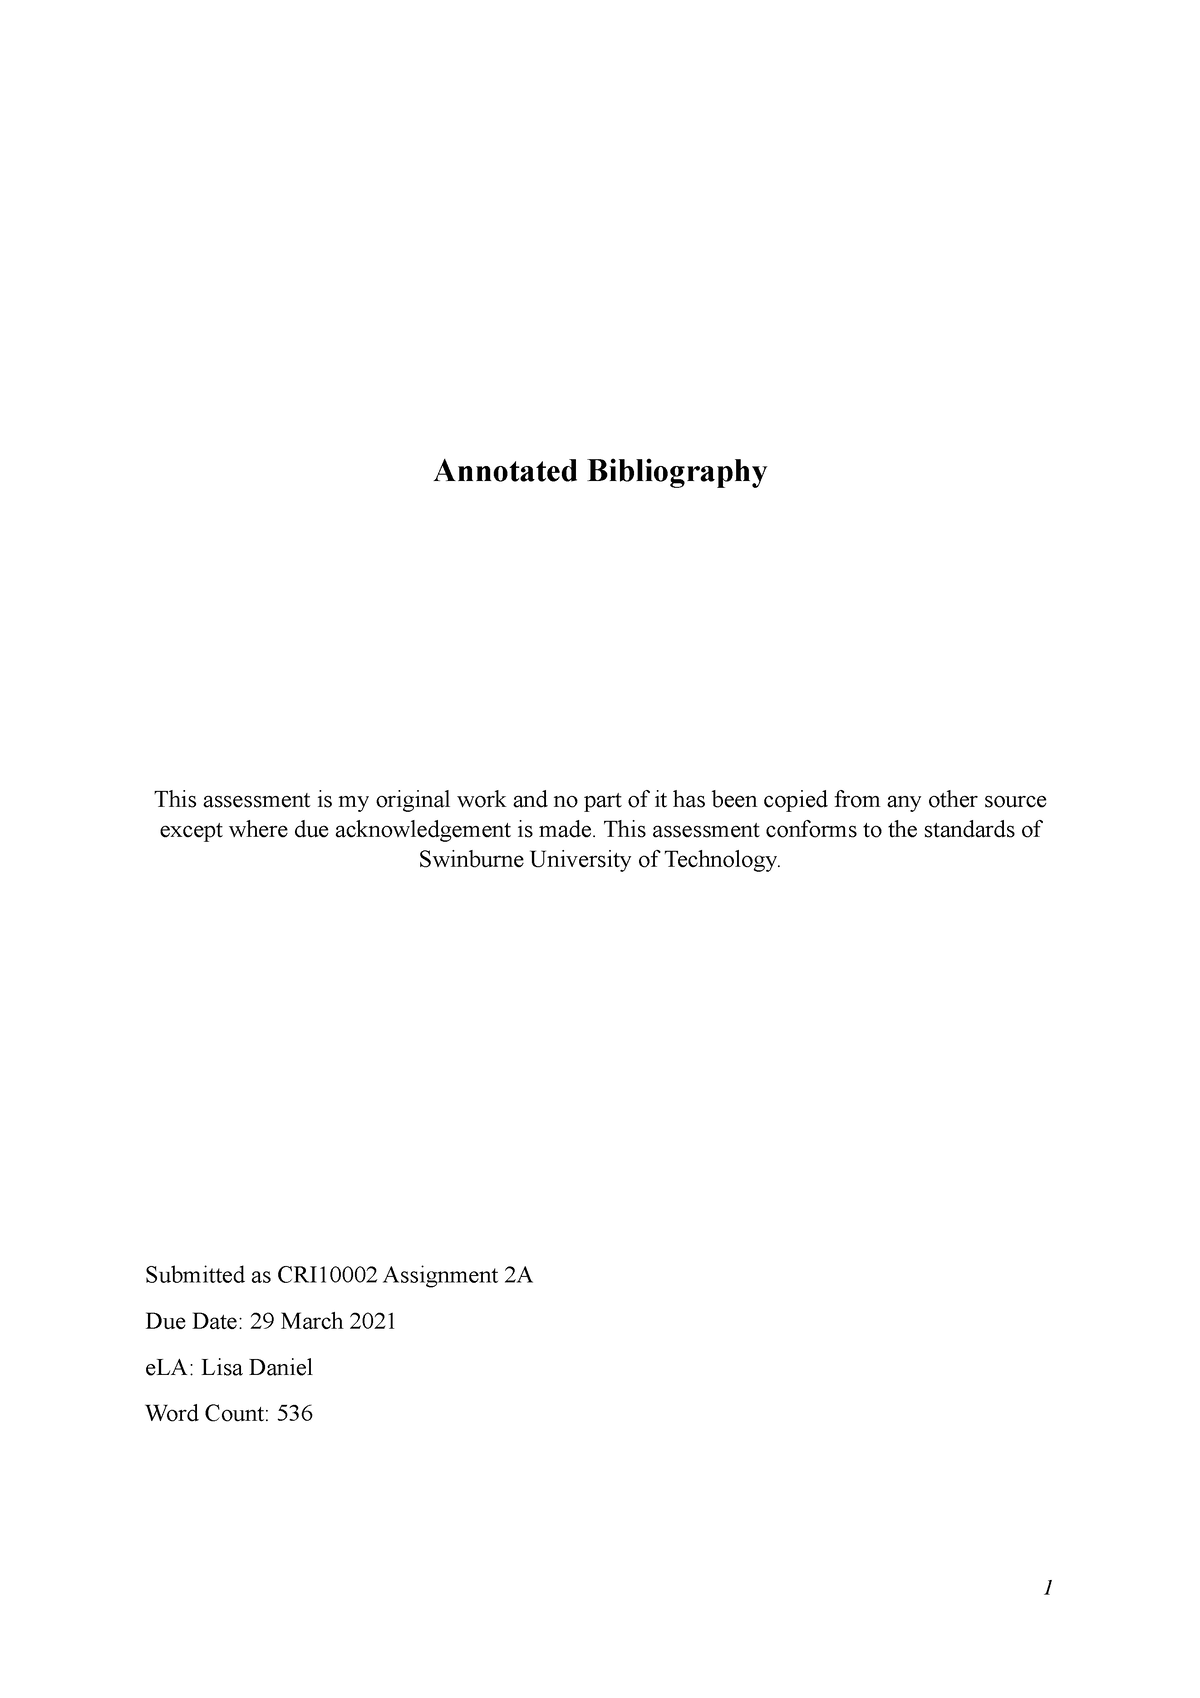 assignment 2a annotated bibliography